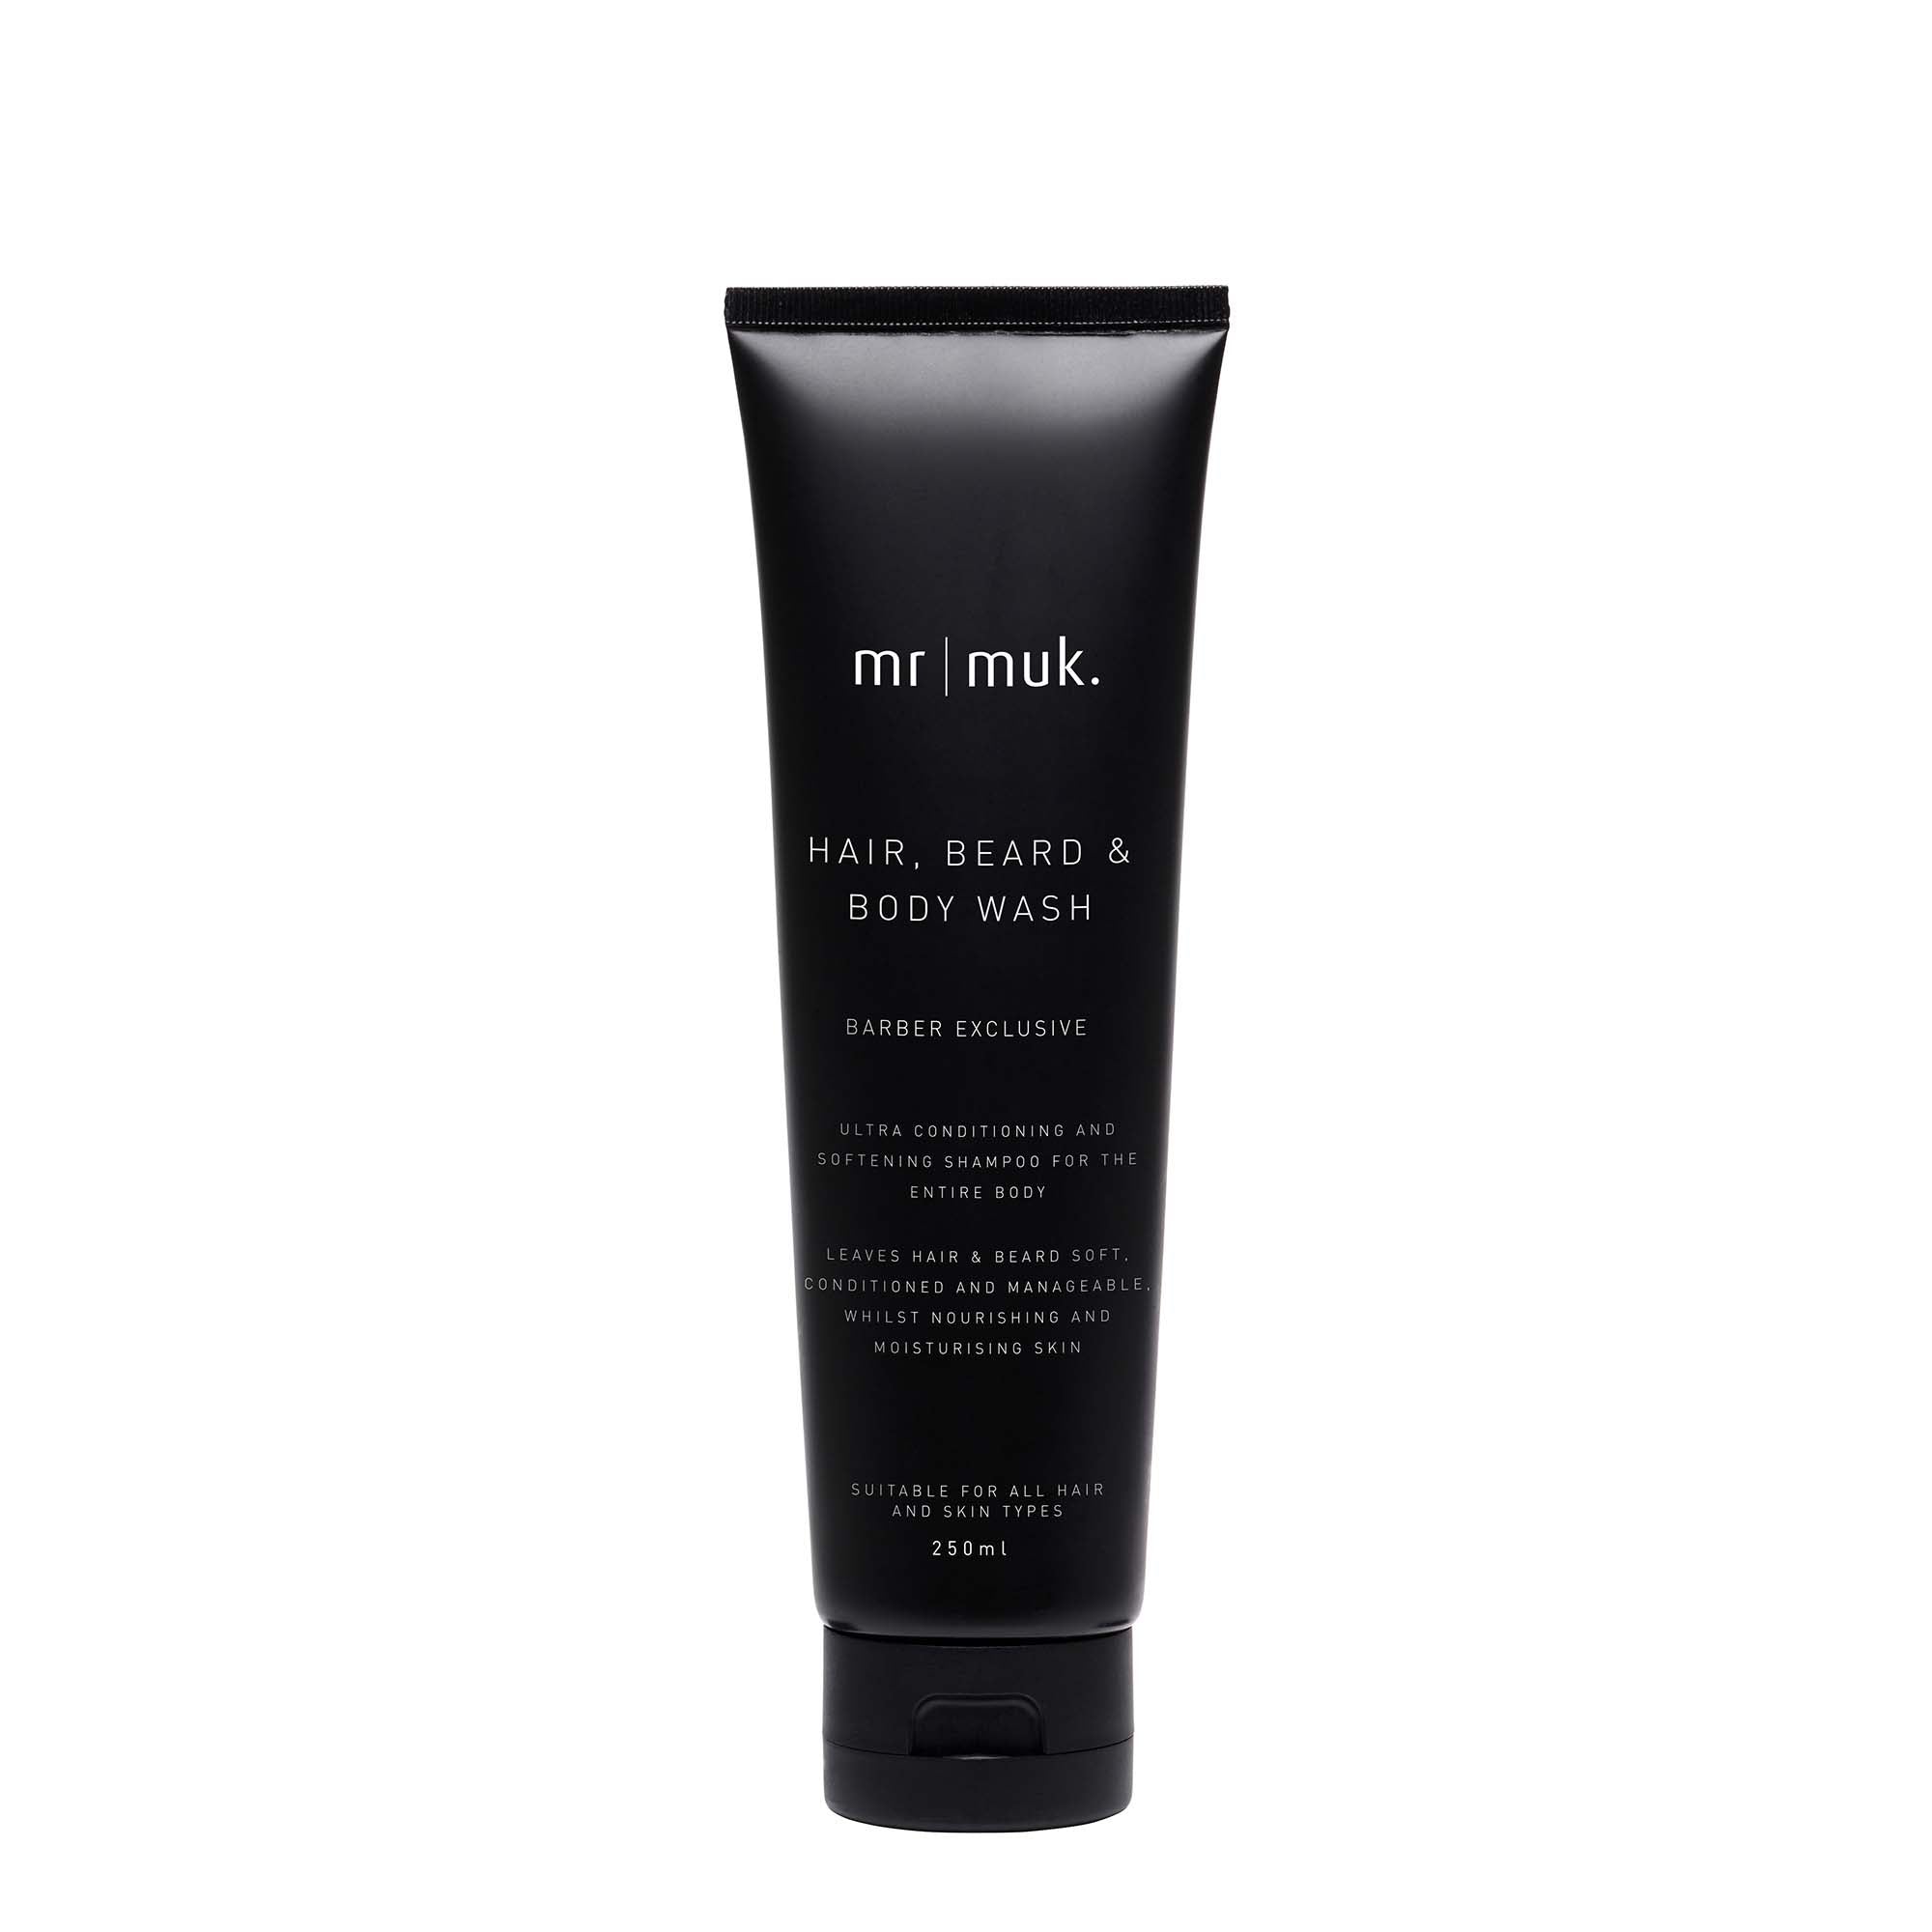 Mr Muk Hair, Beard & Body Wash leaves your hair and beard totally soft and touchable whilst nourishing and moisturising the skin.